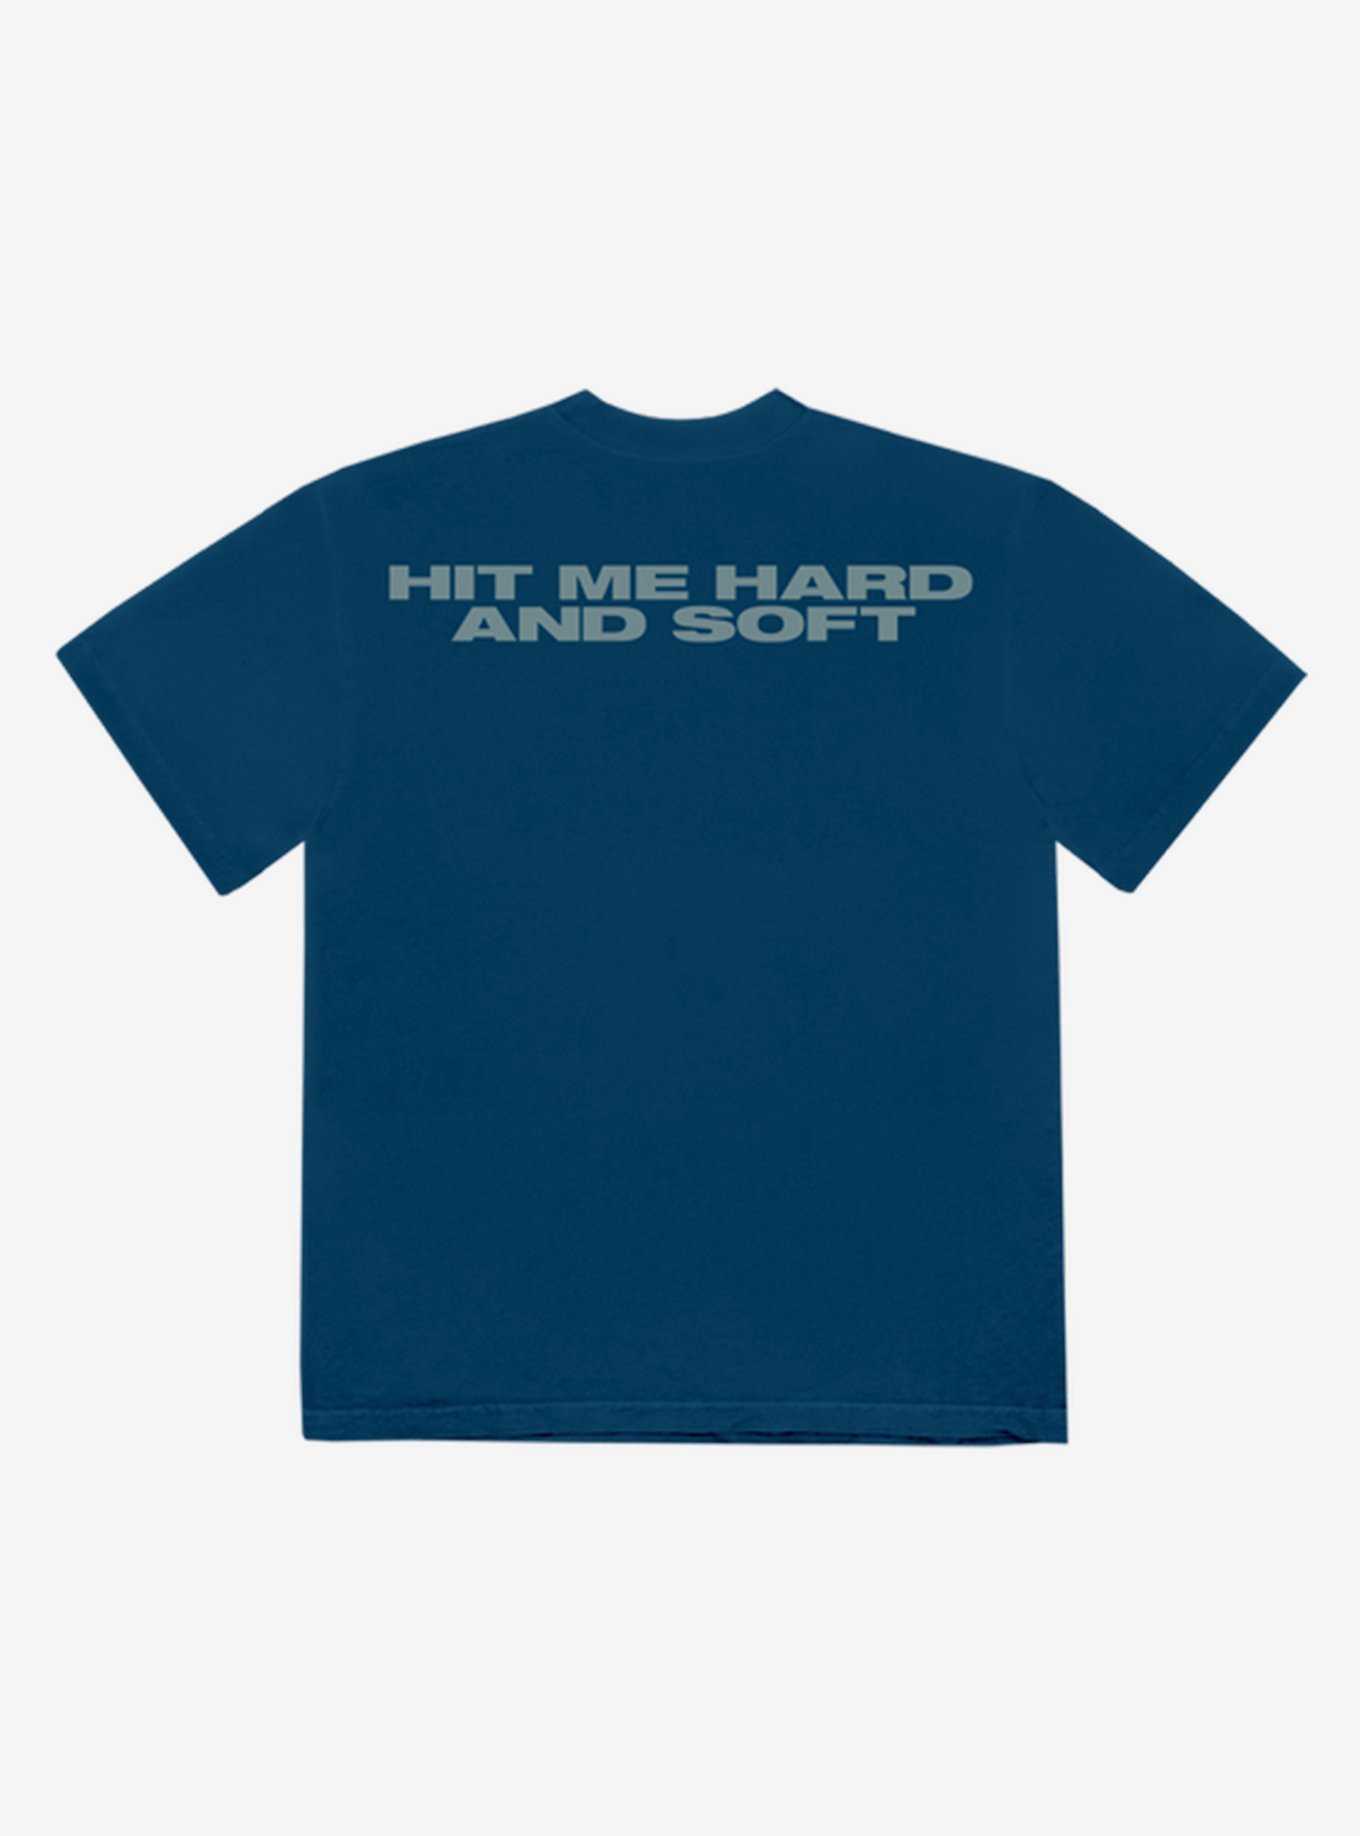 Billie Eilish Hit Me Hard And Soft Blue Two-Sided T-Shirt Hot Topic Exclusive, , hi-res